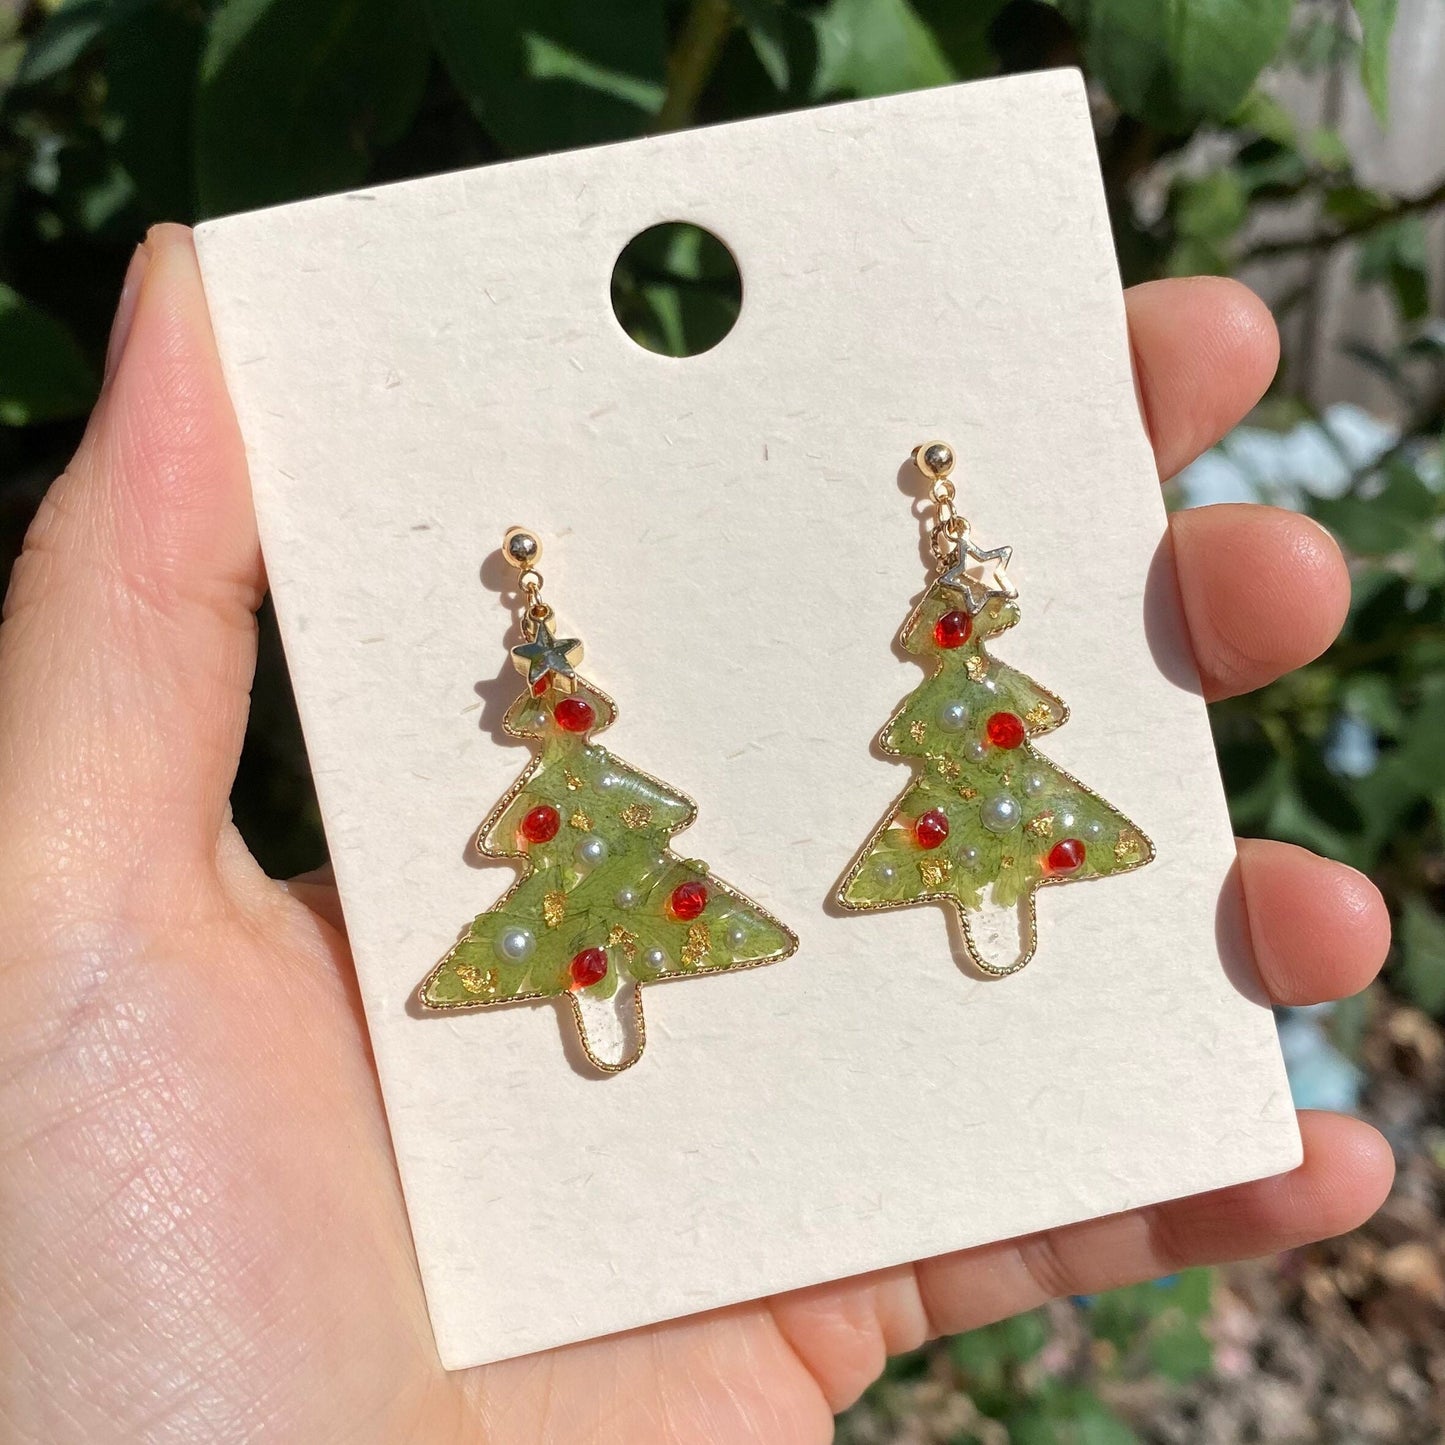 Christmas tree uv resin with real fern leaves/Holiday stud earrings/Pressed flower plants/Gift for her